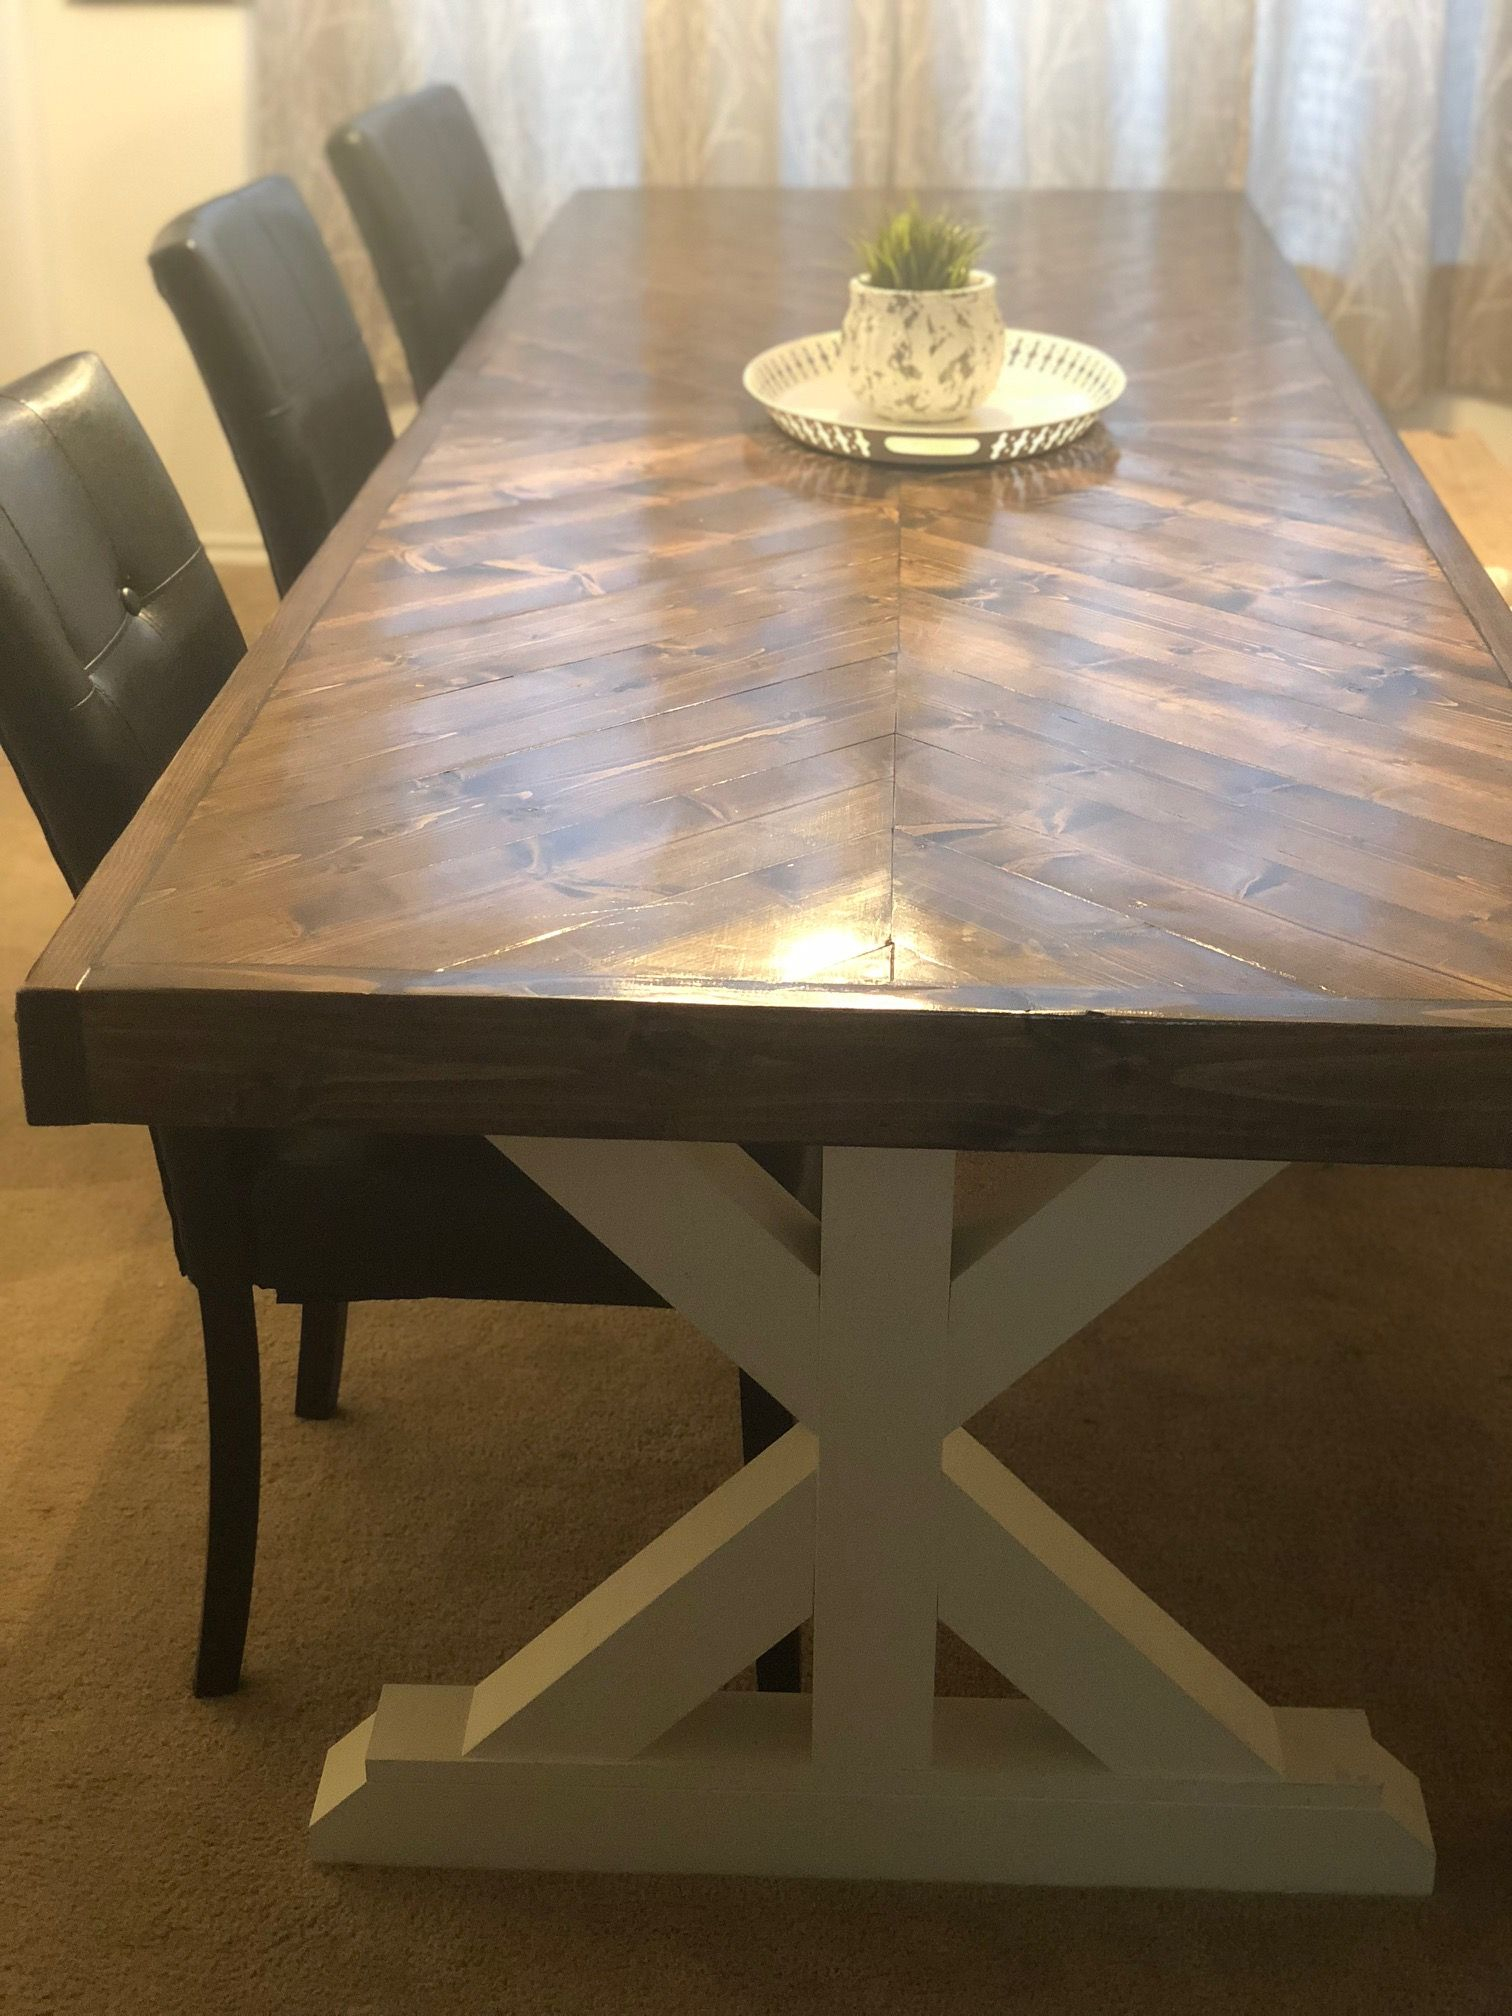 Rustic Dining Room Table For 12 • Faucet Ideas Site